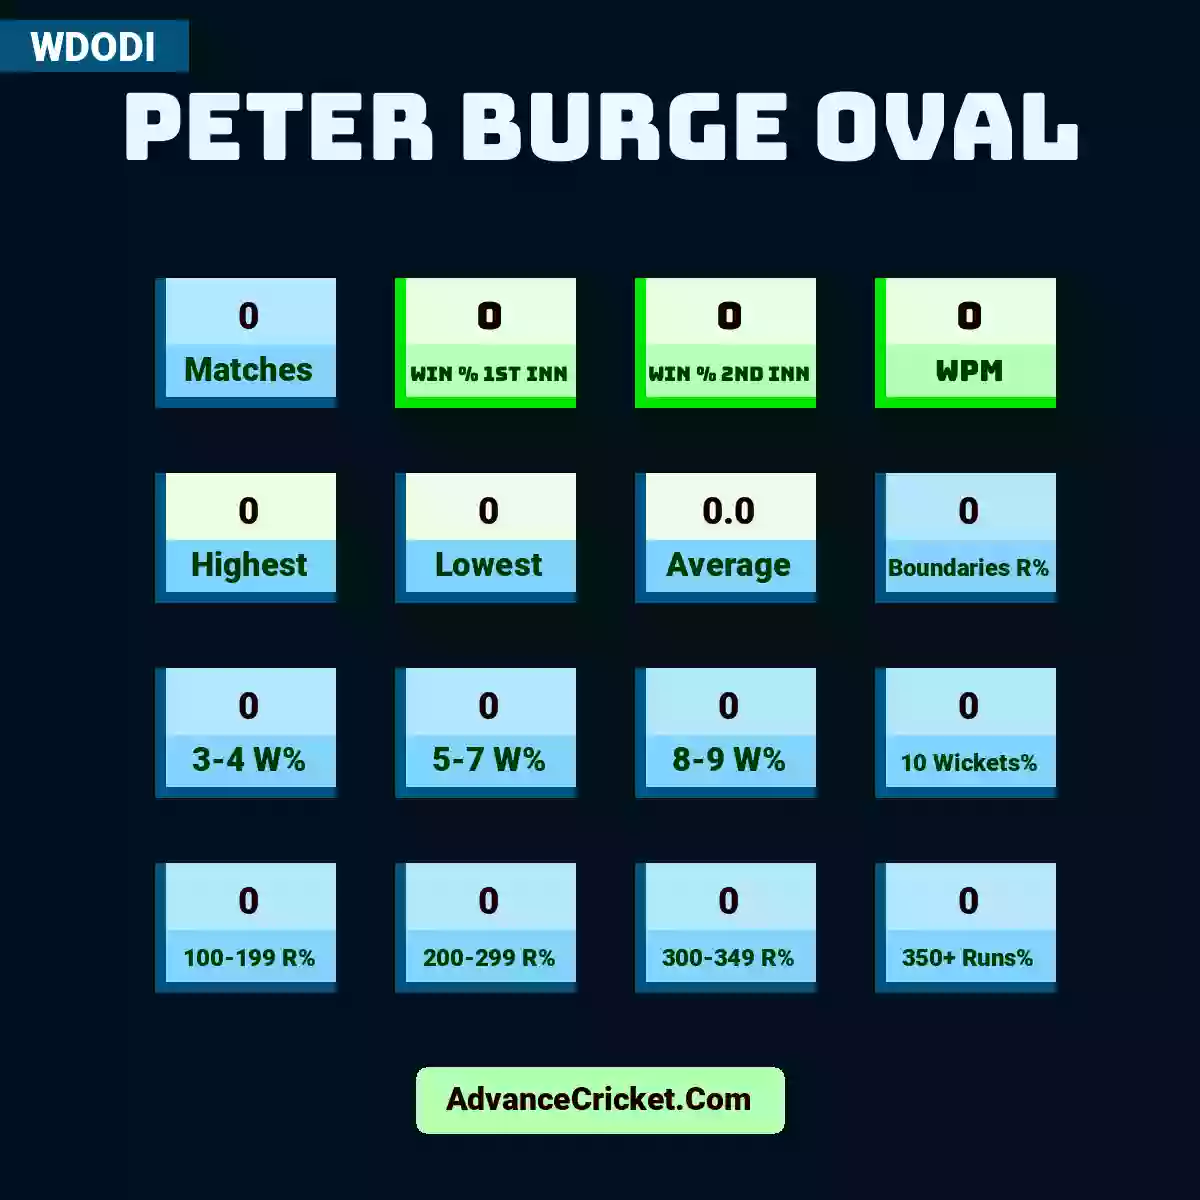 Image showing Peter Burge Oval with Matches: 0, Win % 1st Inn: 0, Win % 2nd Inn: 0, WPM: 0, Highest: 0, Lowest: 0, Average: 0.0, Boundaries R%: 0, 3-4 W%: 0, 5-7 W%: 0, 8-9 W%: 0, 10 Wickets%: 0, 100-199 R%: 0, 200-299 R%: 0, 300-349 R%: 0, 350+ Runs%: 0.